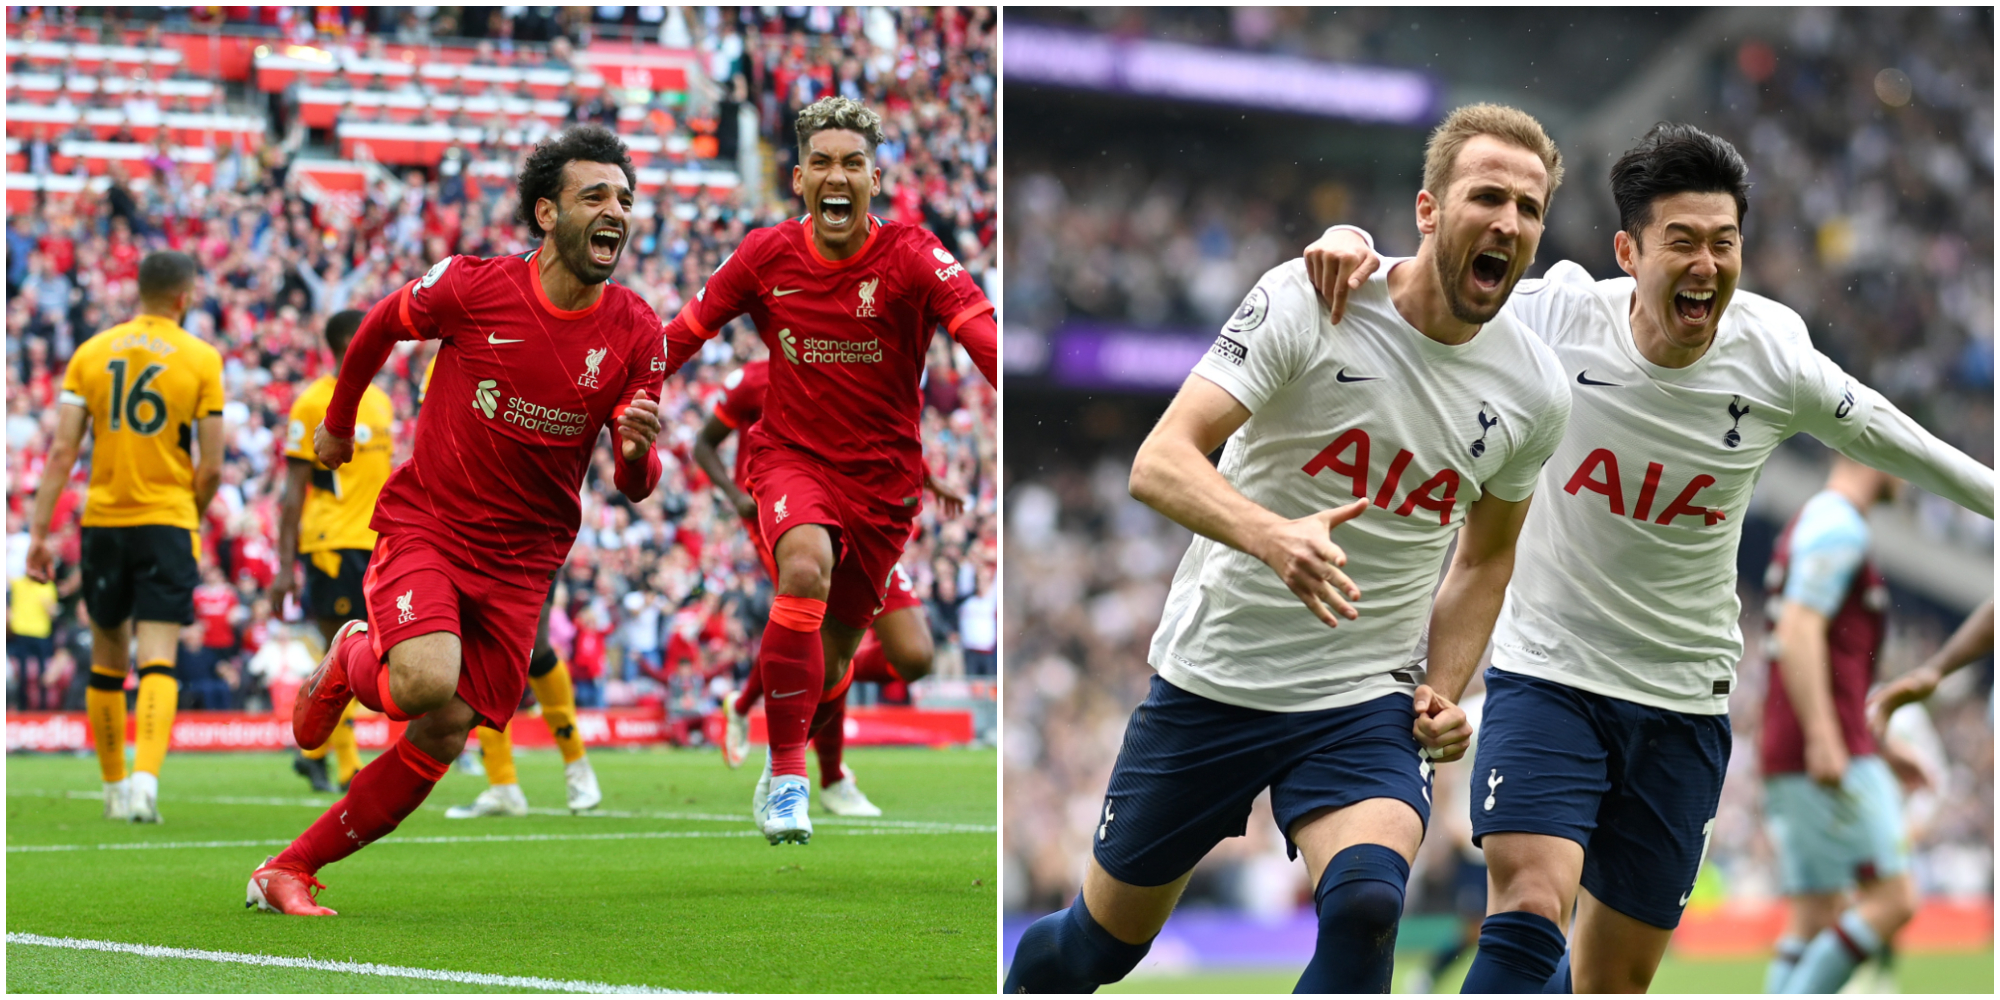 ‘Frightening’ Tottenham man is better than Salah and is the PL’s best player – not Harry Kane – says West Ham’s Antonio